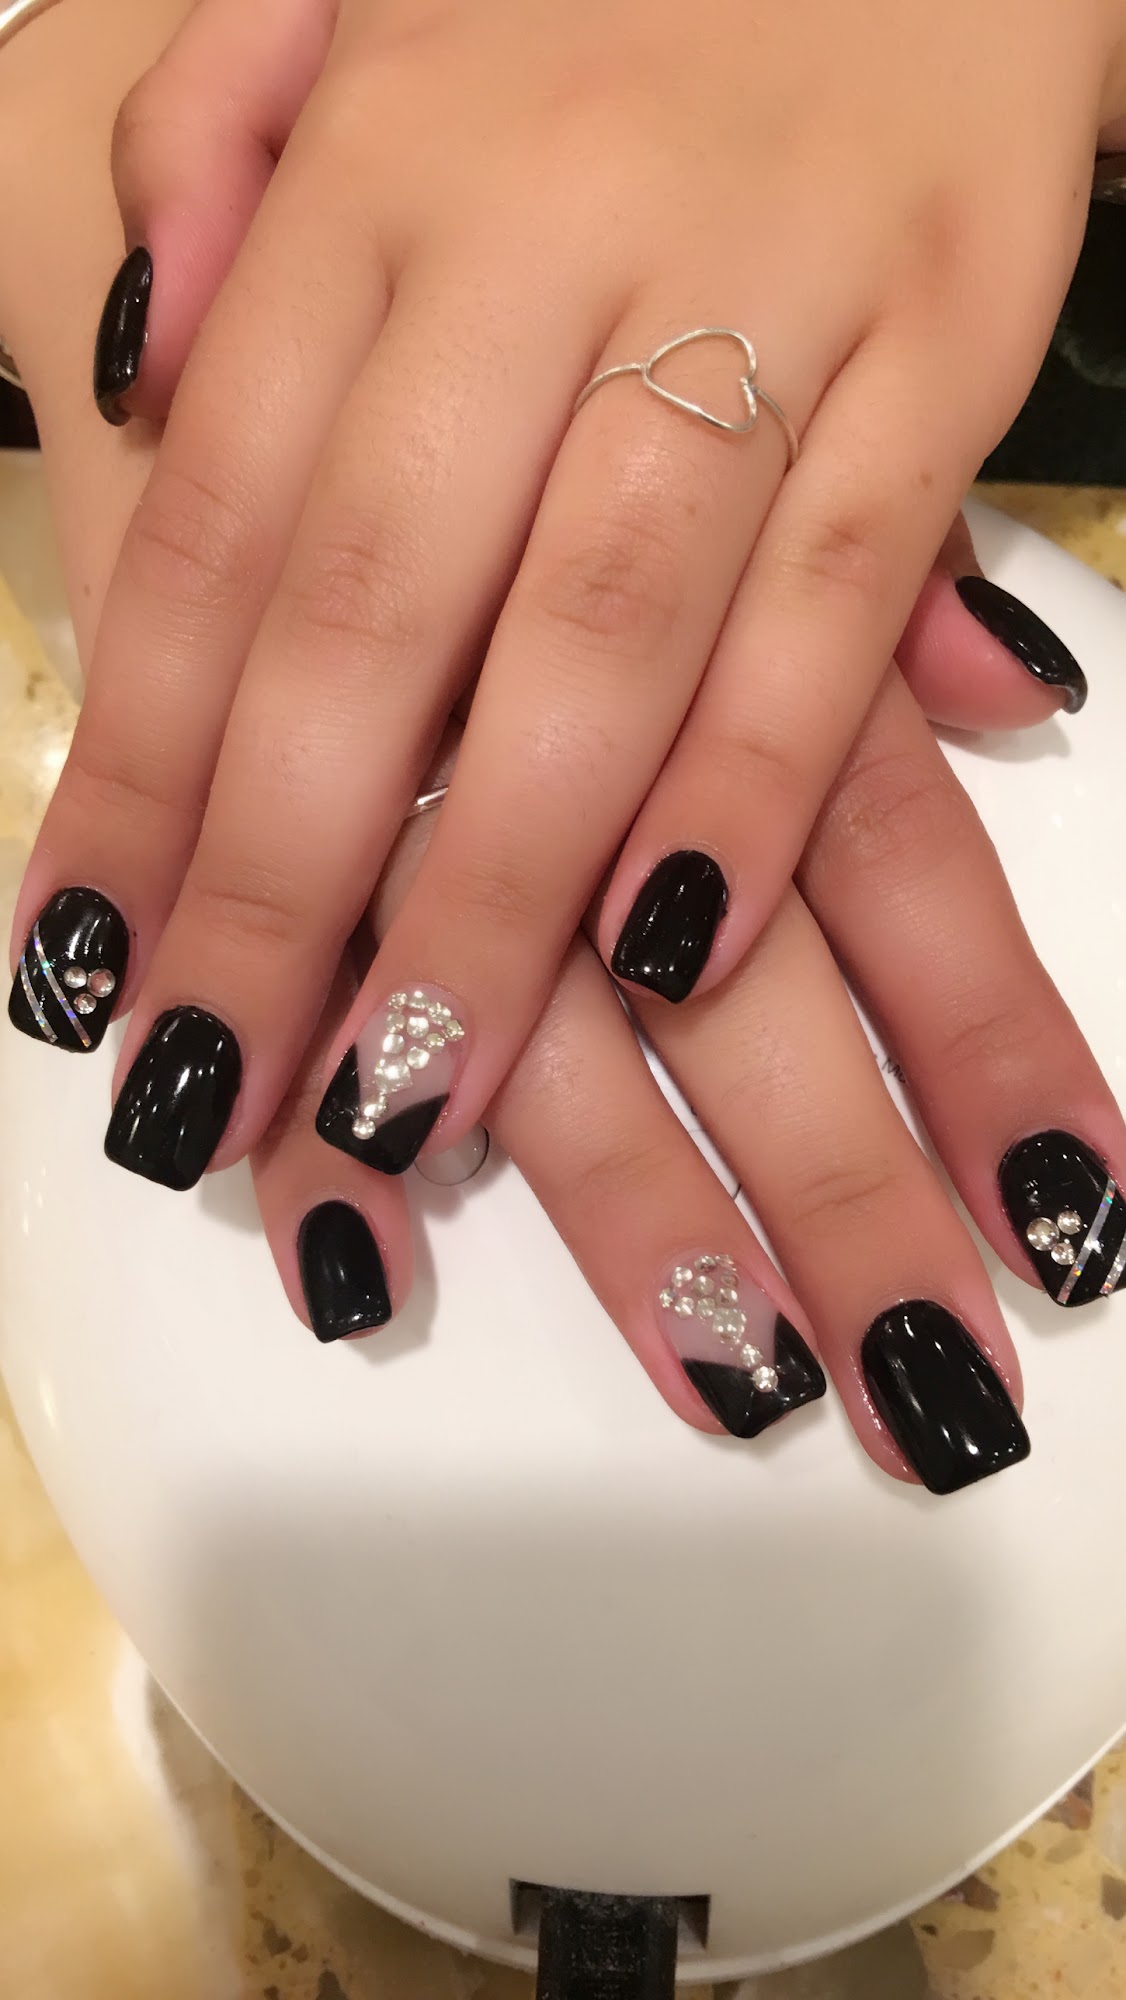 Polish Nail 215 Rivervale Rd, River Vale New Jersey 07675